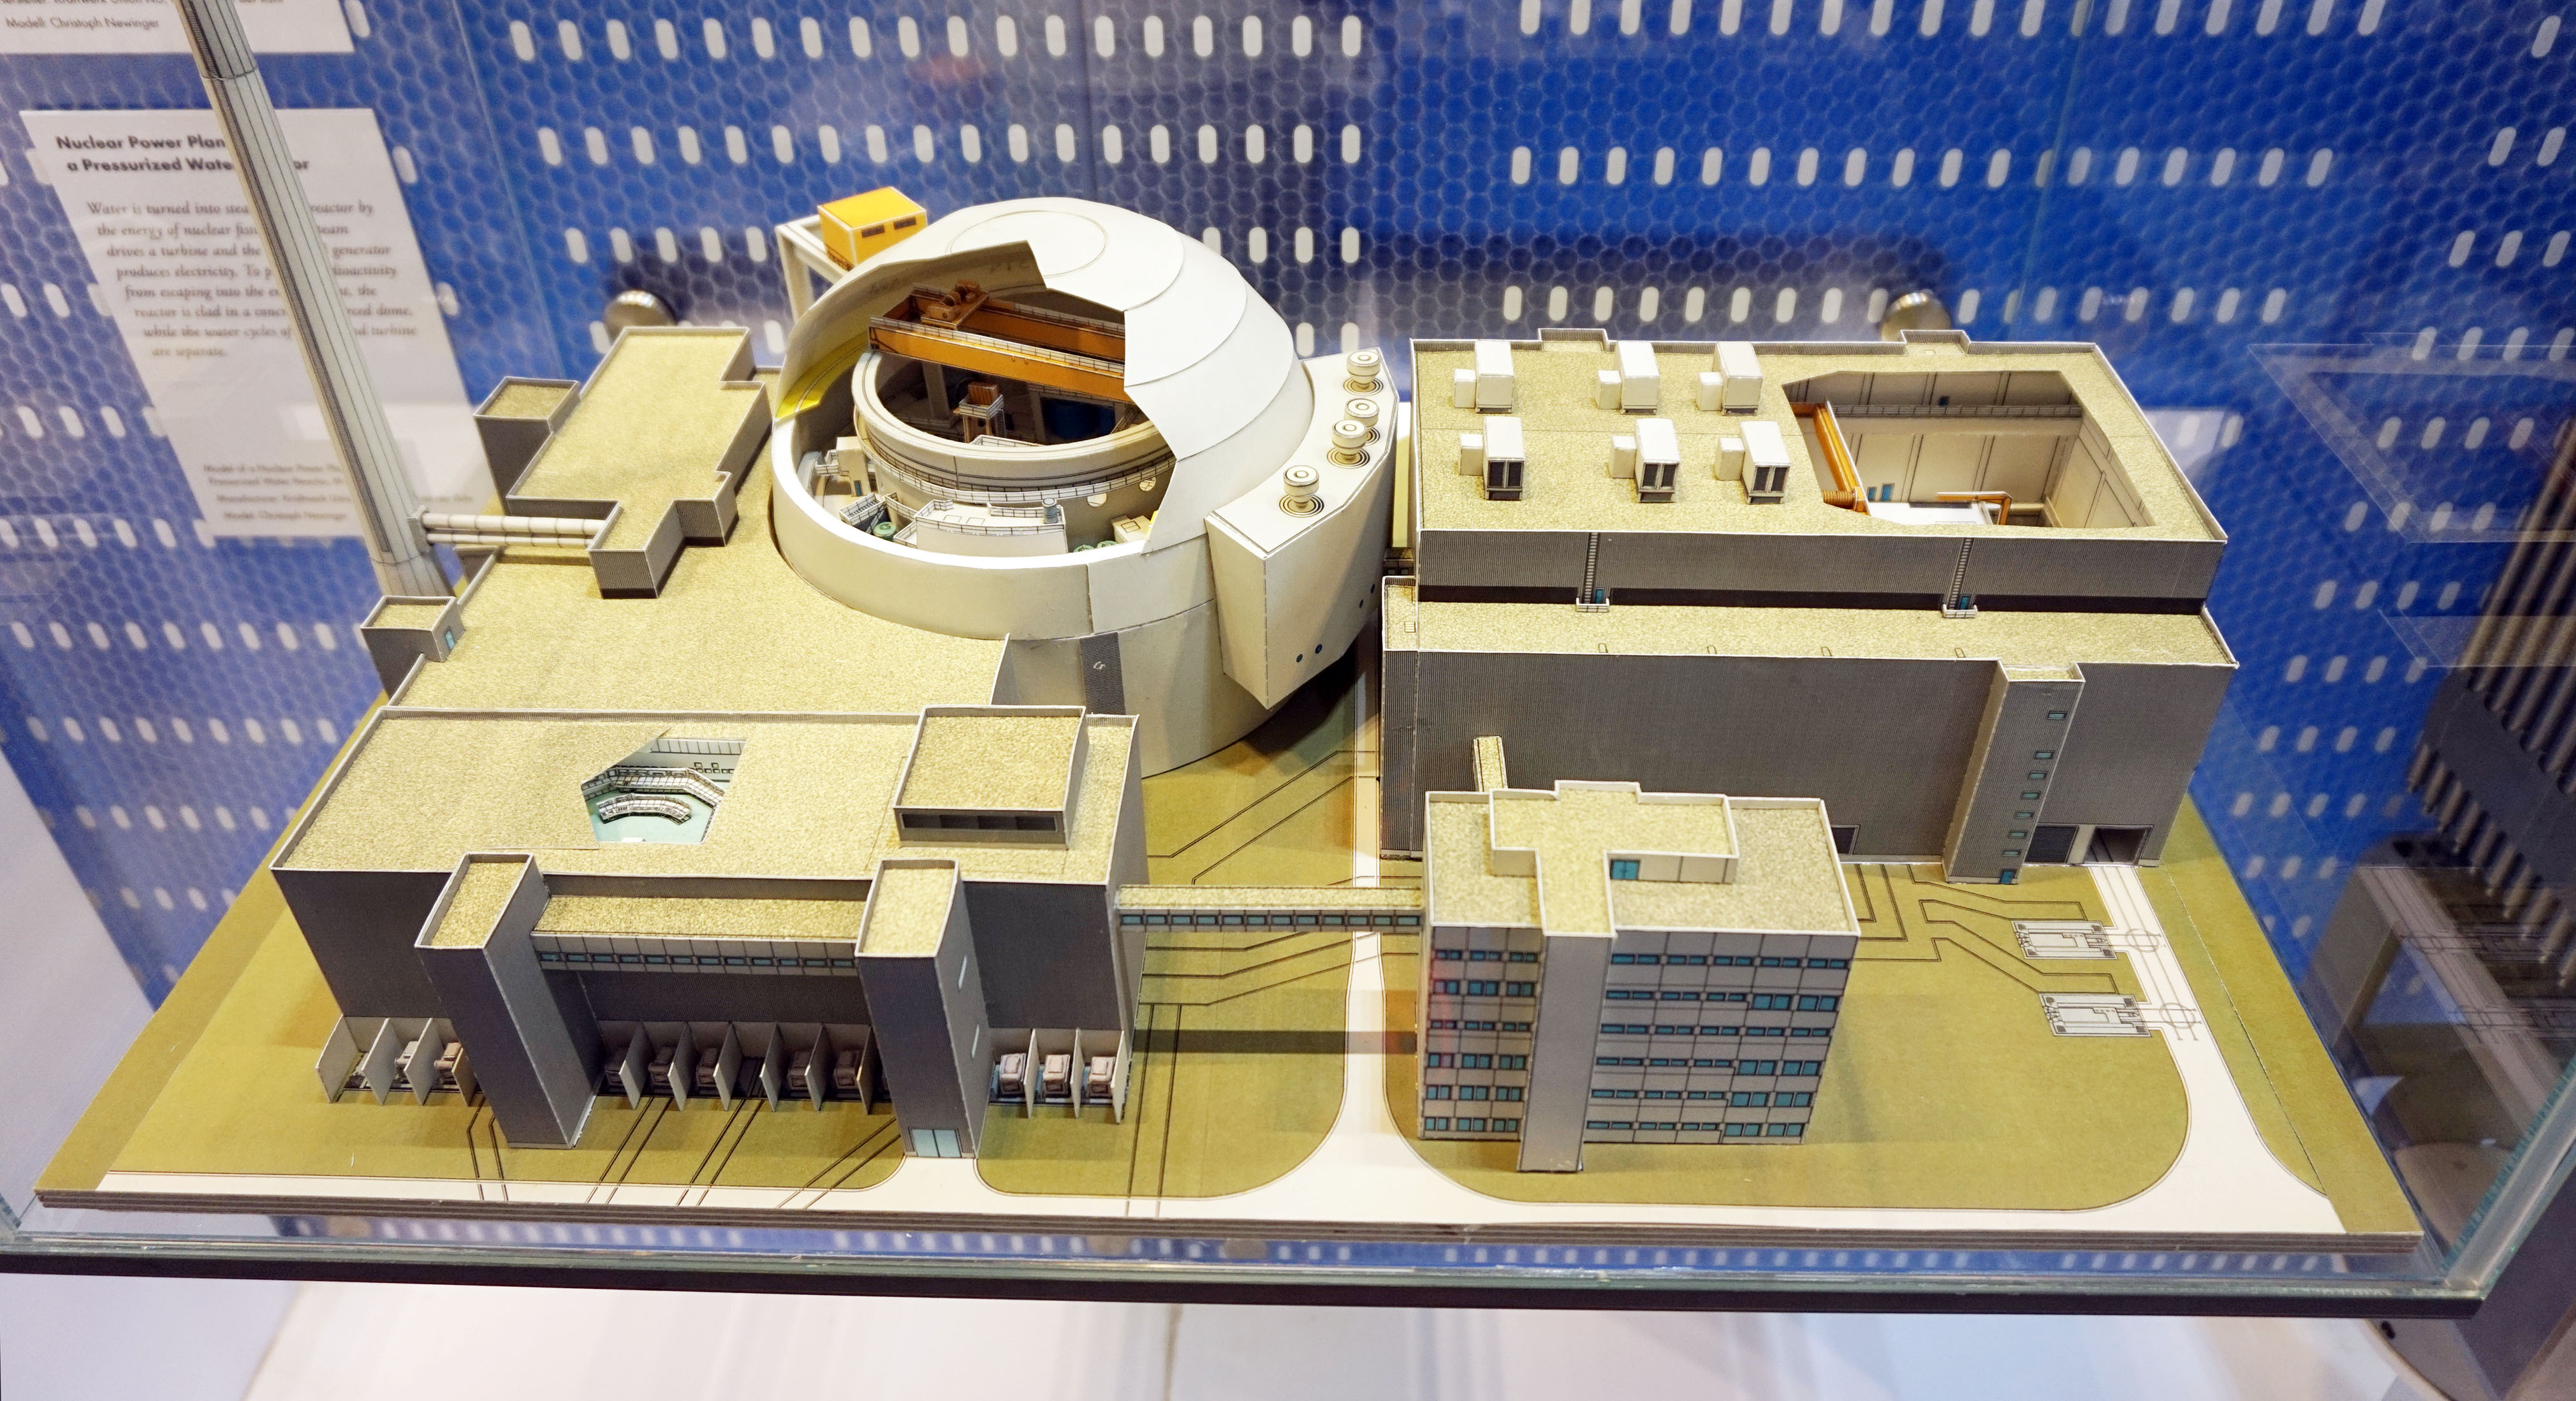 nuclear power plant model